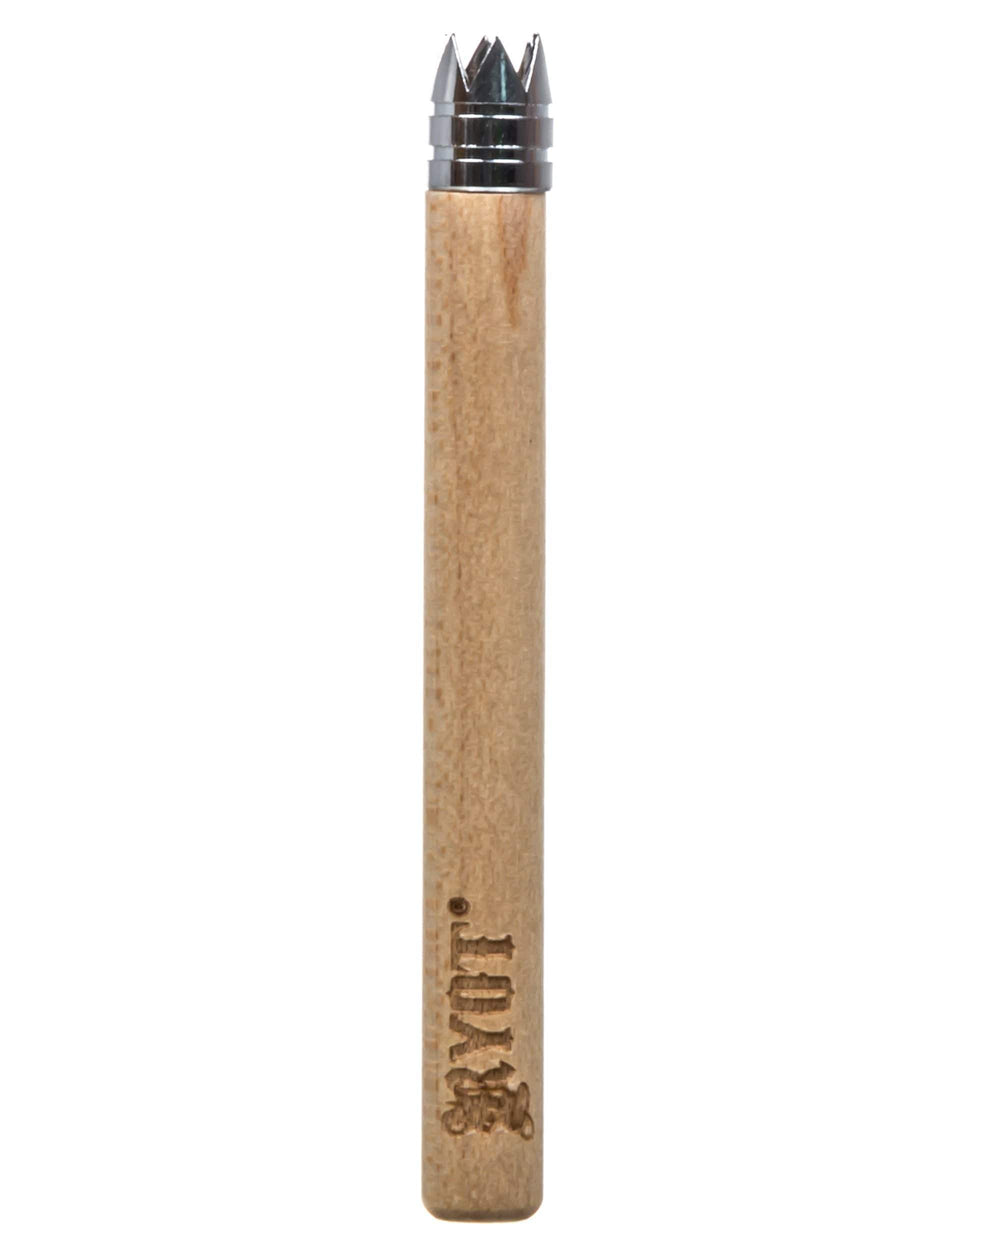 RYOT 420 Accessories Bamboo RYOT Wooden One Hitter w/ Digger Tip RYOT Wooden One Hitter w/ Digger Tip - Morden Vape & 420 SuperStore, Manitoba, Canada